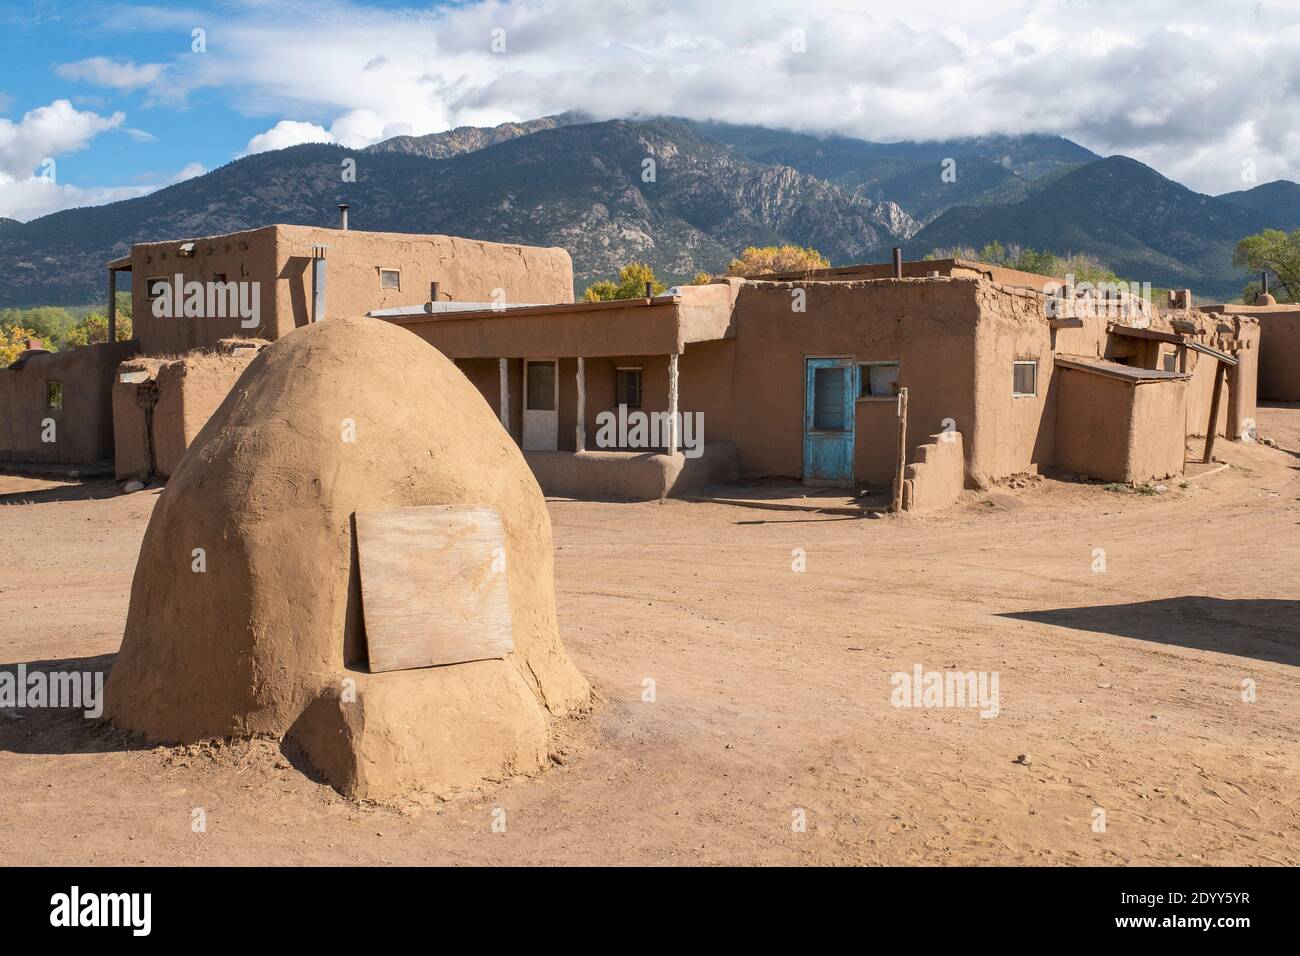 An outdoor adobe oven in the historical Native American adobe village of Taos Pueblo, New Mexico, USA. A UNESCO World Heritage Site. Stock Photo